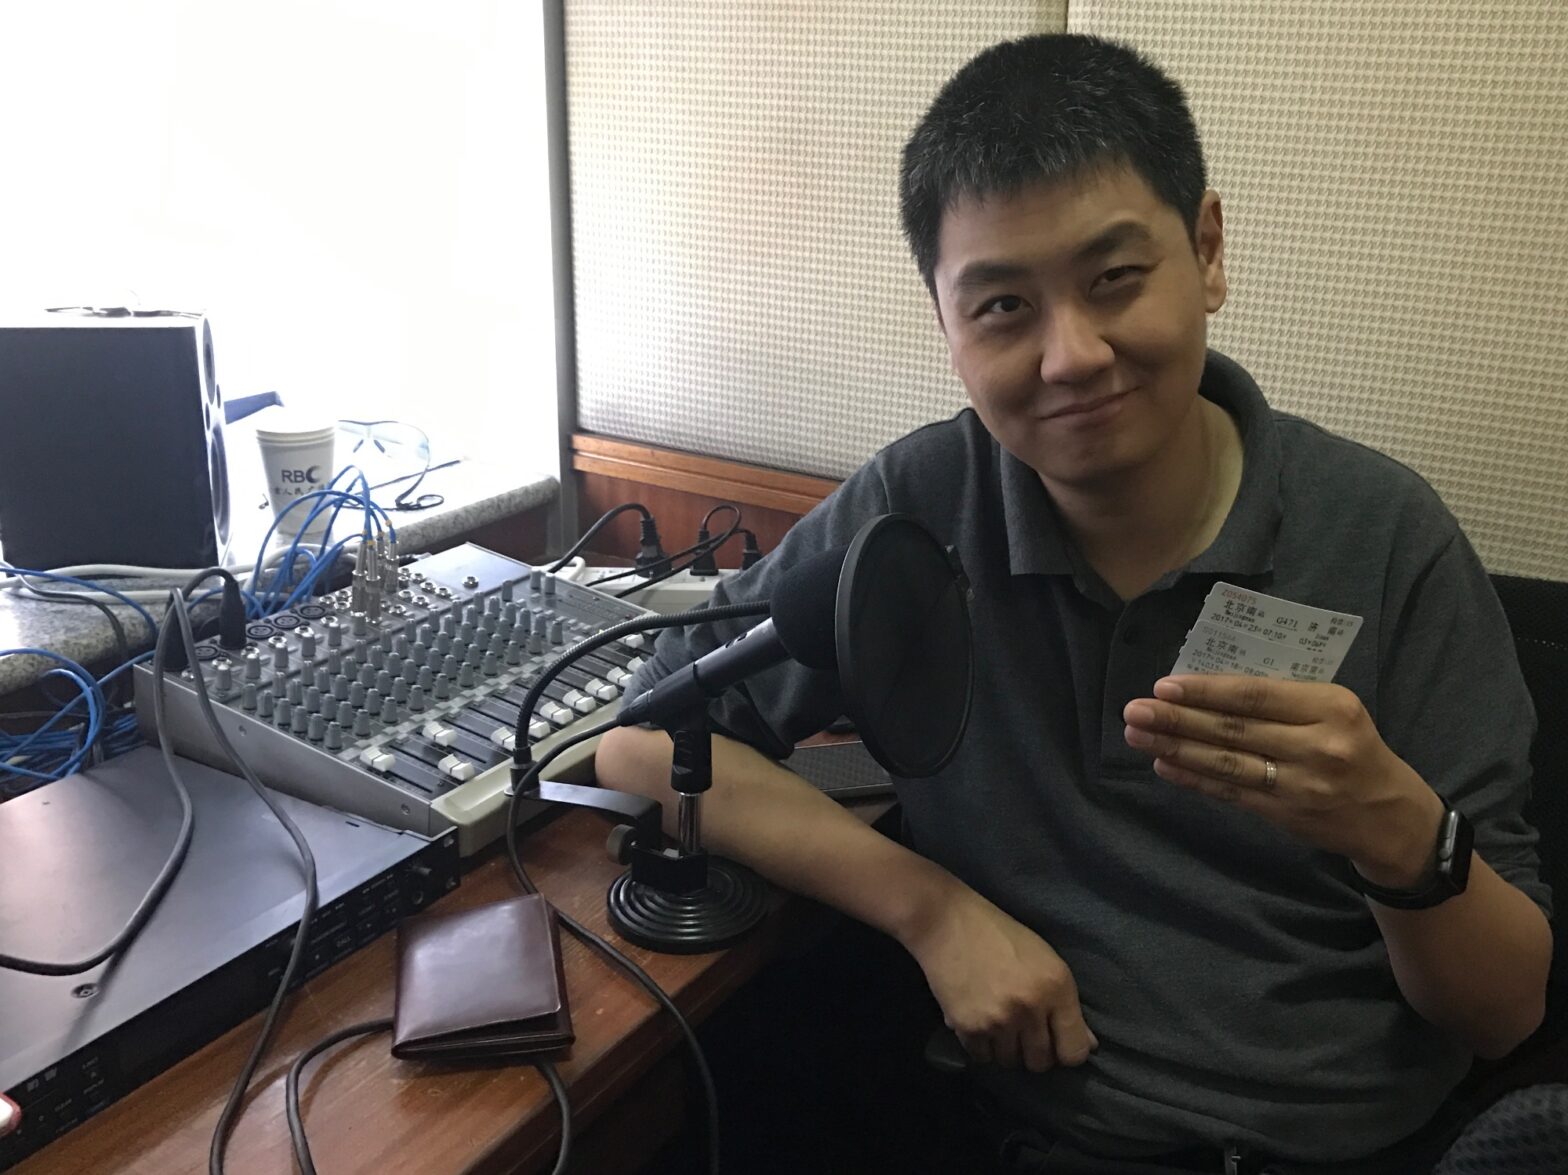 A picture of David Feng holding two railway tickets in front of an audio recording microphone